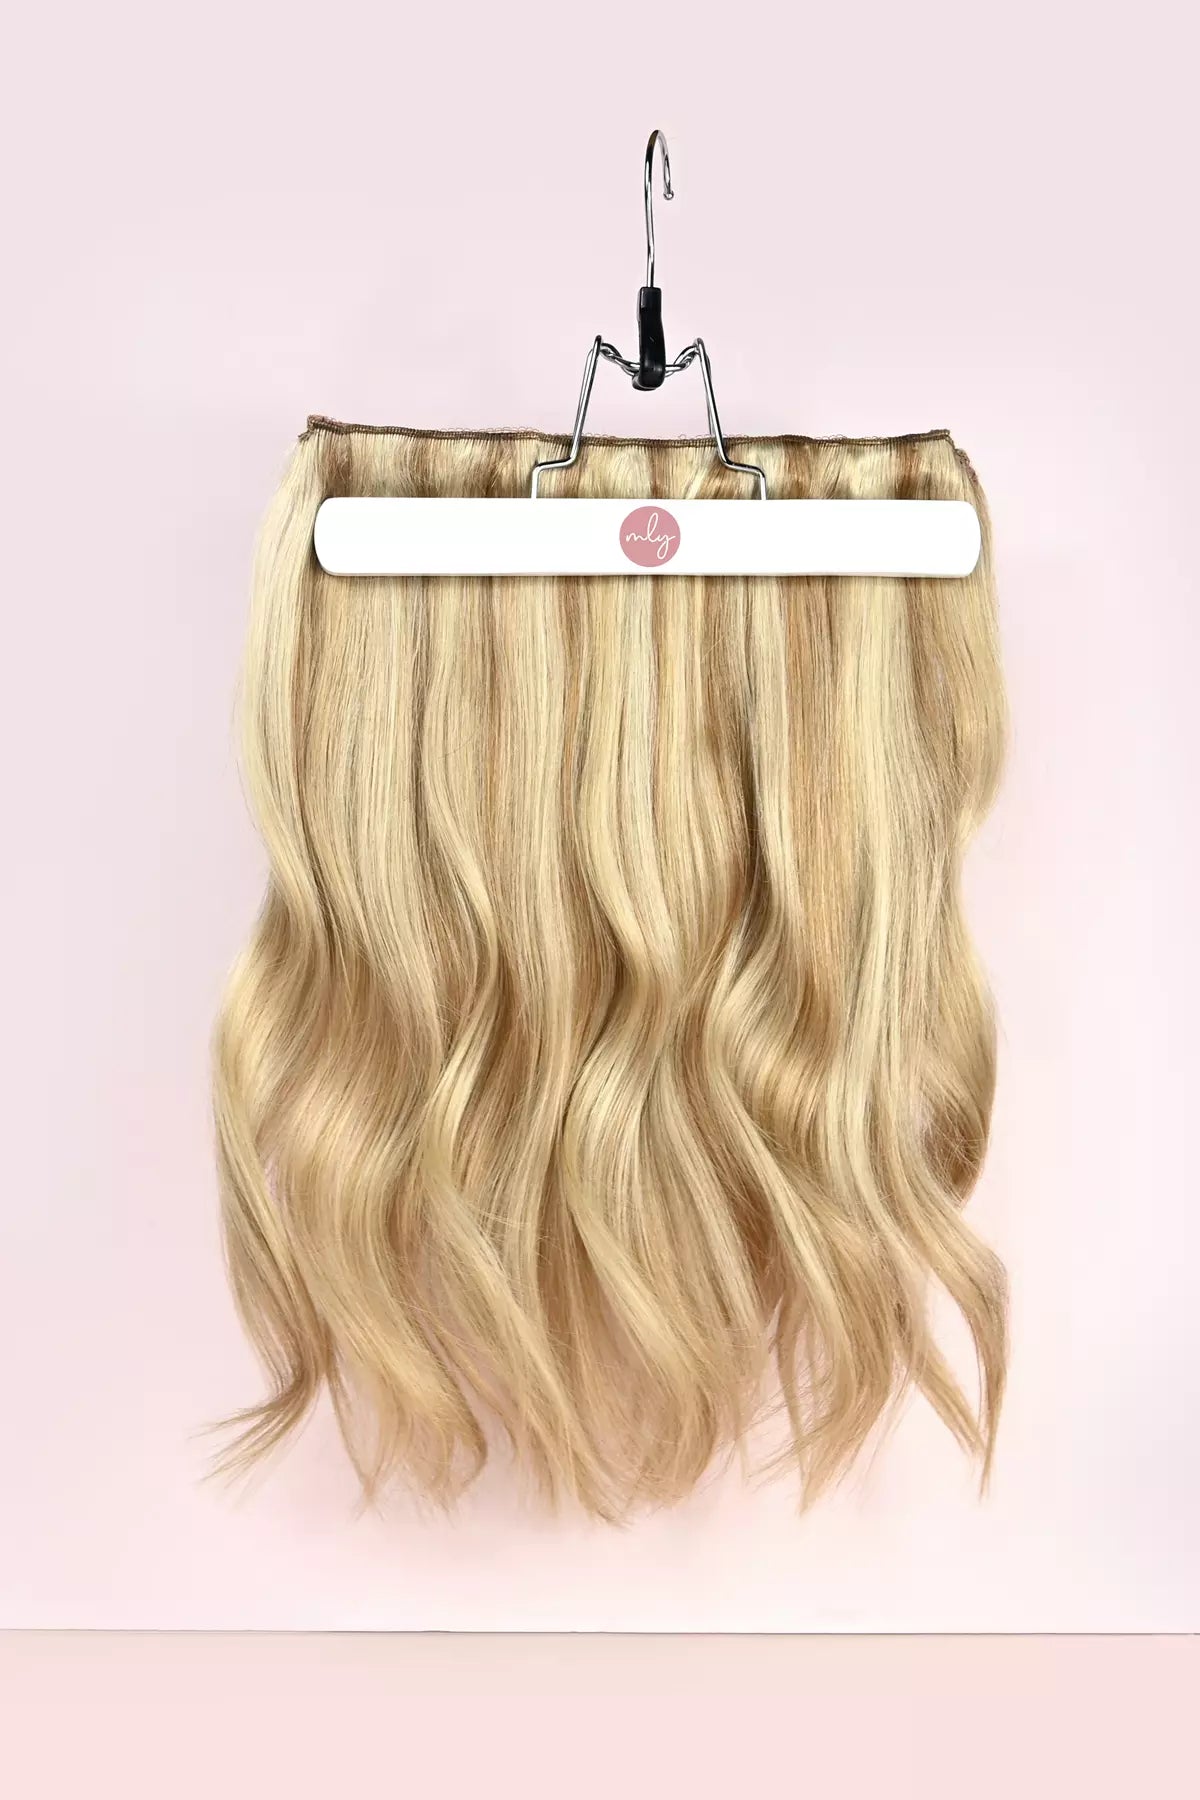 Licht blonde highlights clip-in hairextensions ☀️ - Human hair clip ins – MLY